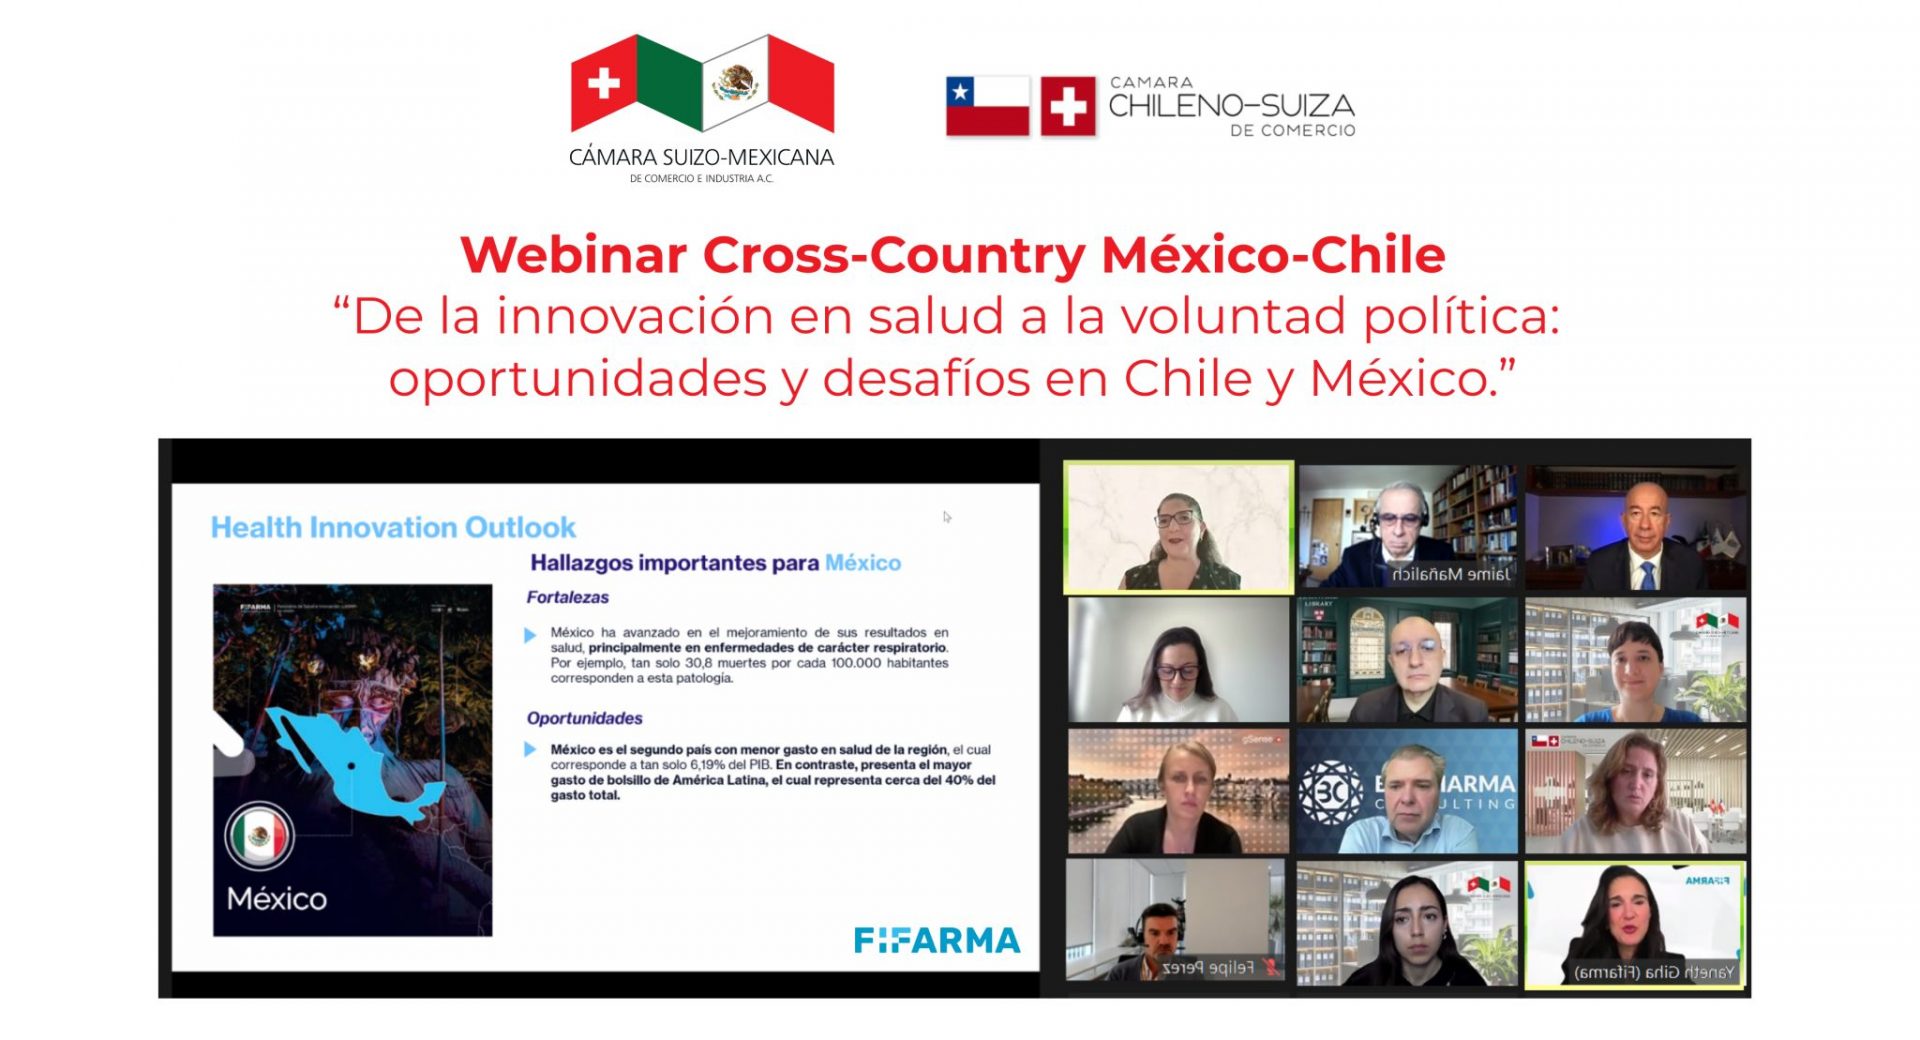 Cross-Country Mexico-Chile Webinar on Health